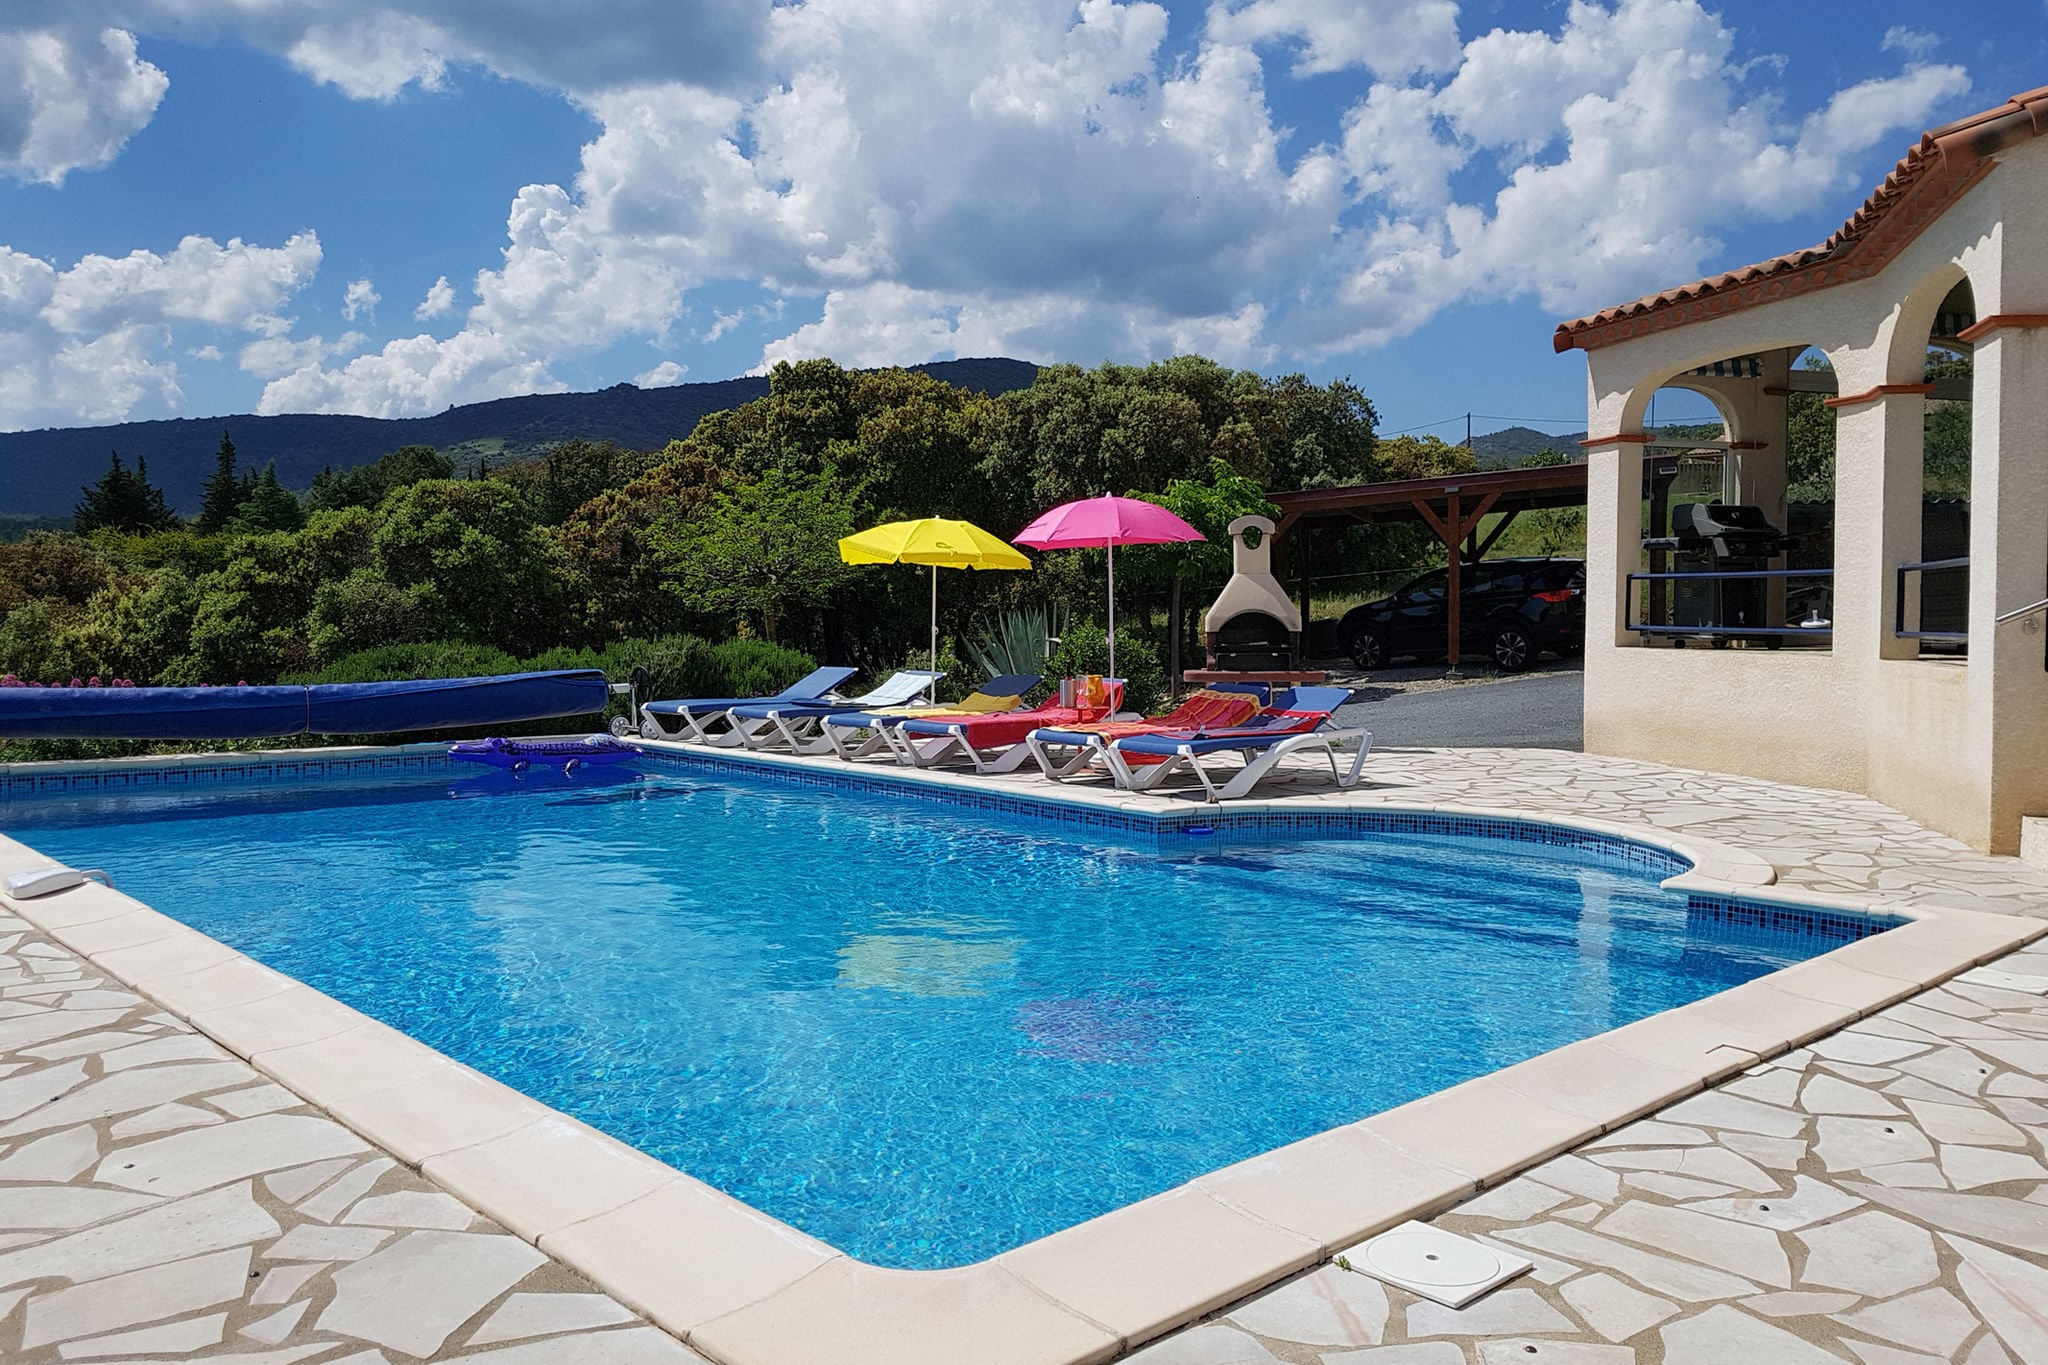 Air-conditioned villa with heated pool, guesthouse and stunning views